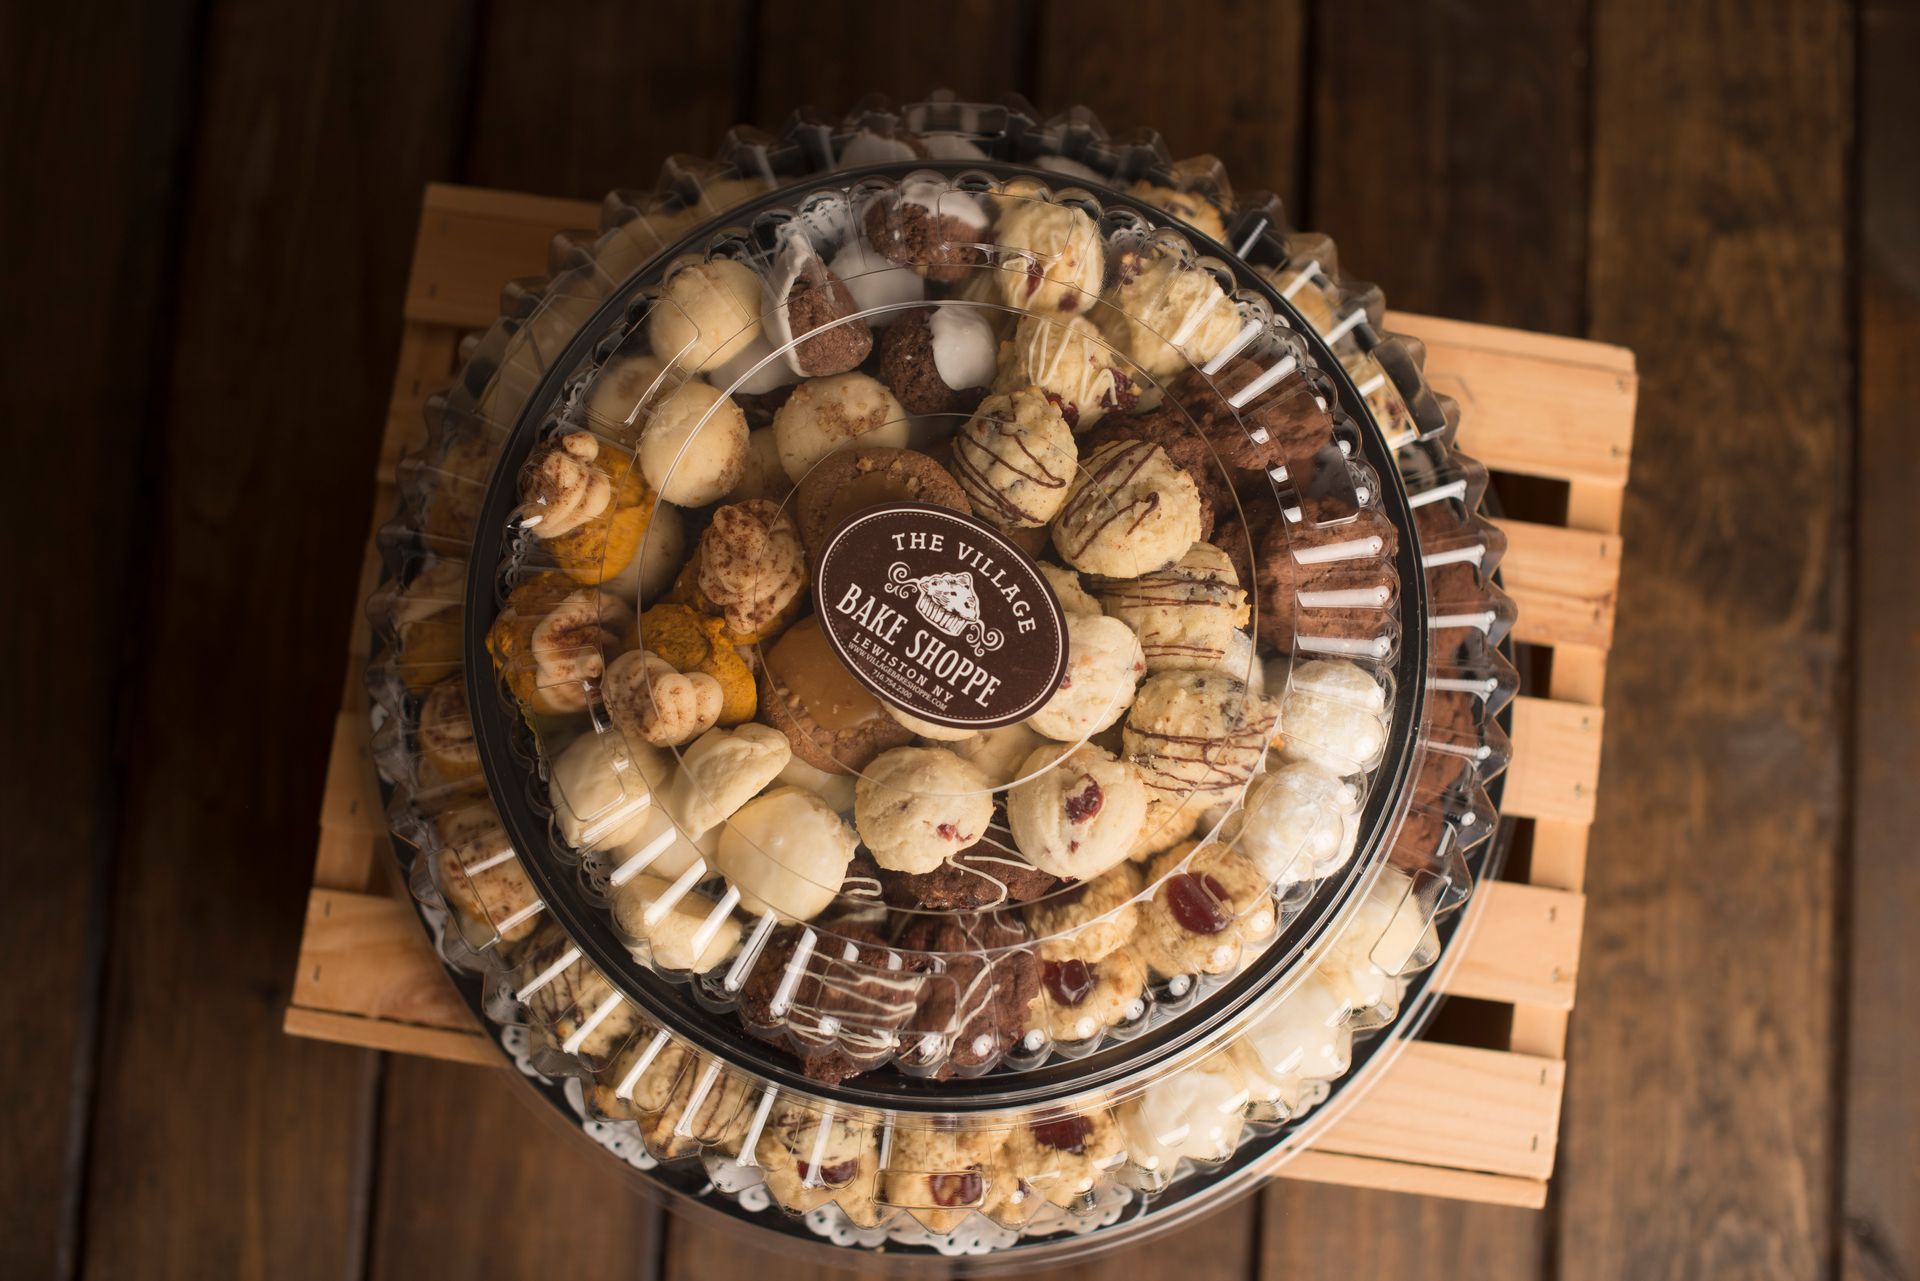 a tray of cookies from the village bake shoppe